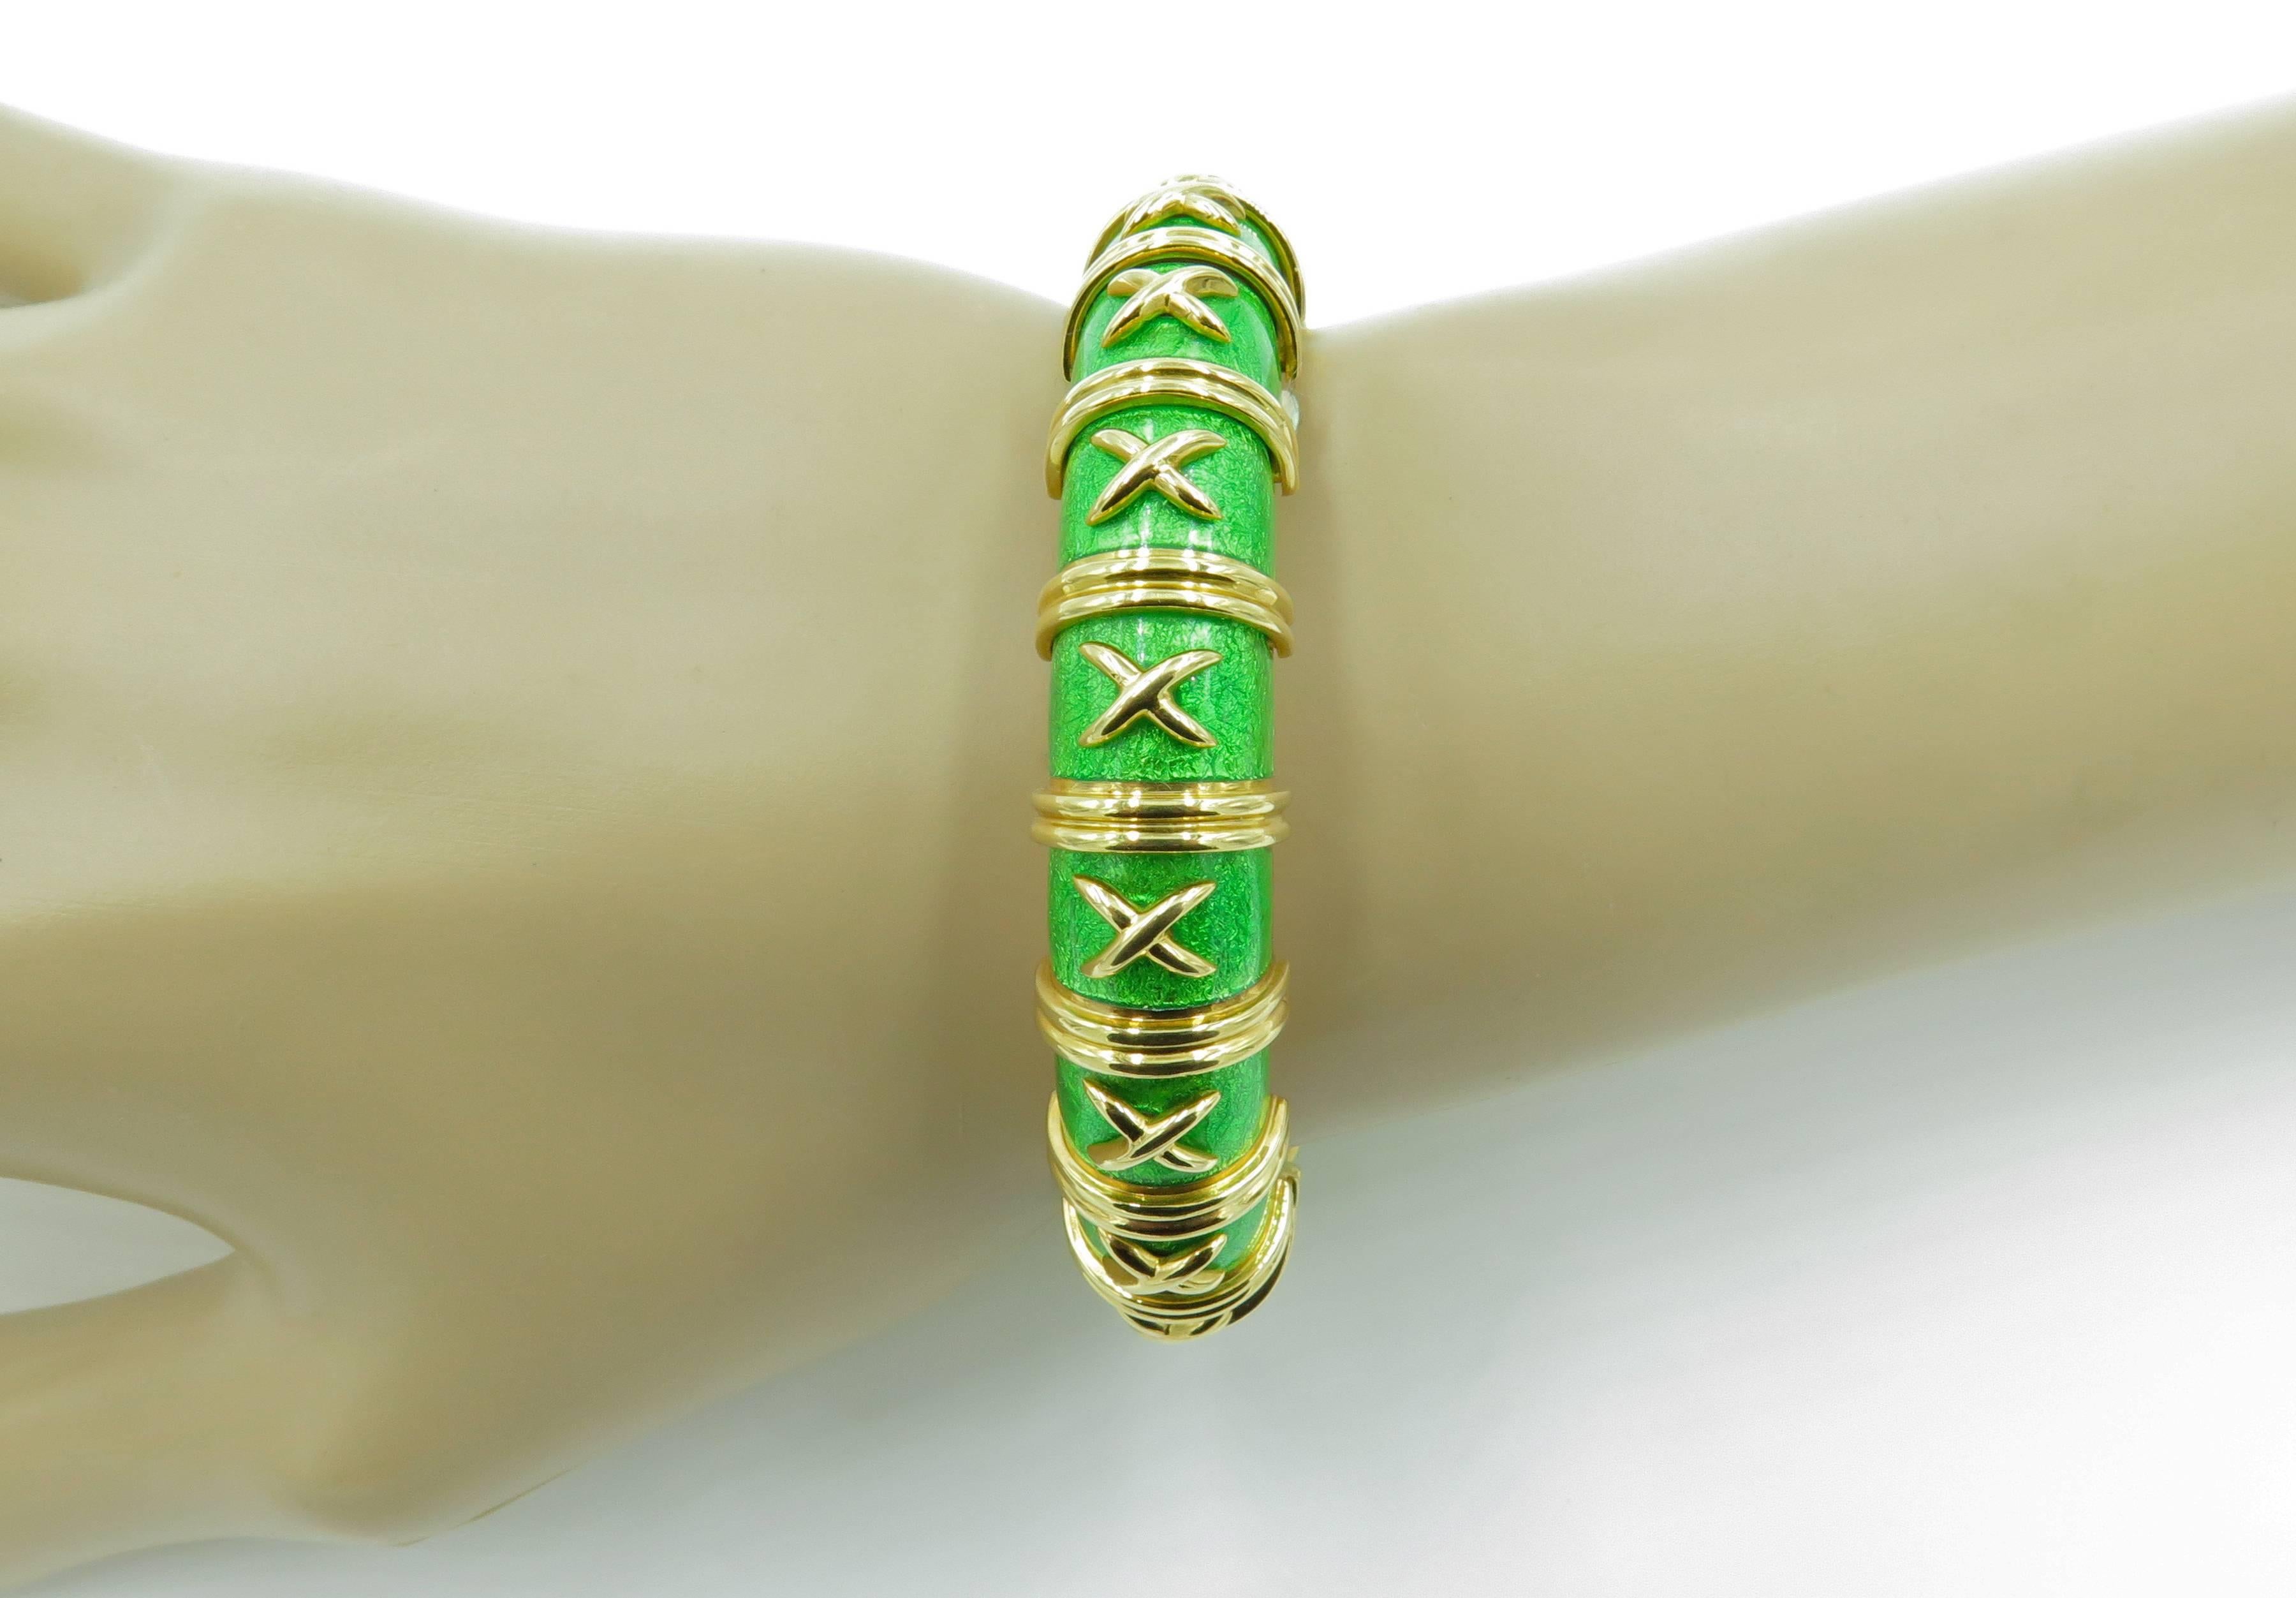 An 18 karat yellow gold and green enamel bracelet.  Signed Tiffany & Co Schlumberger.  Made in France.  The model is known as Croisillon Bracelet. The kelly green paillonné enamel articulated bracelet with applied cross-shaped gold details and